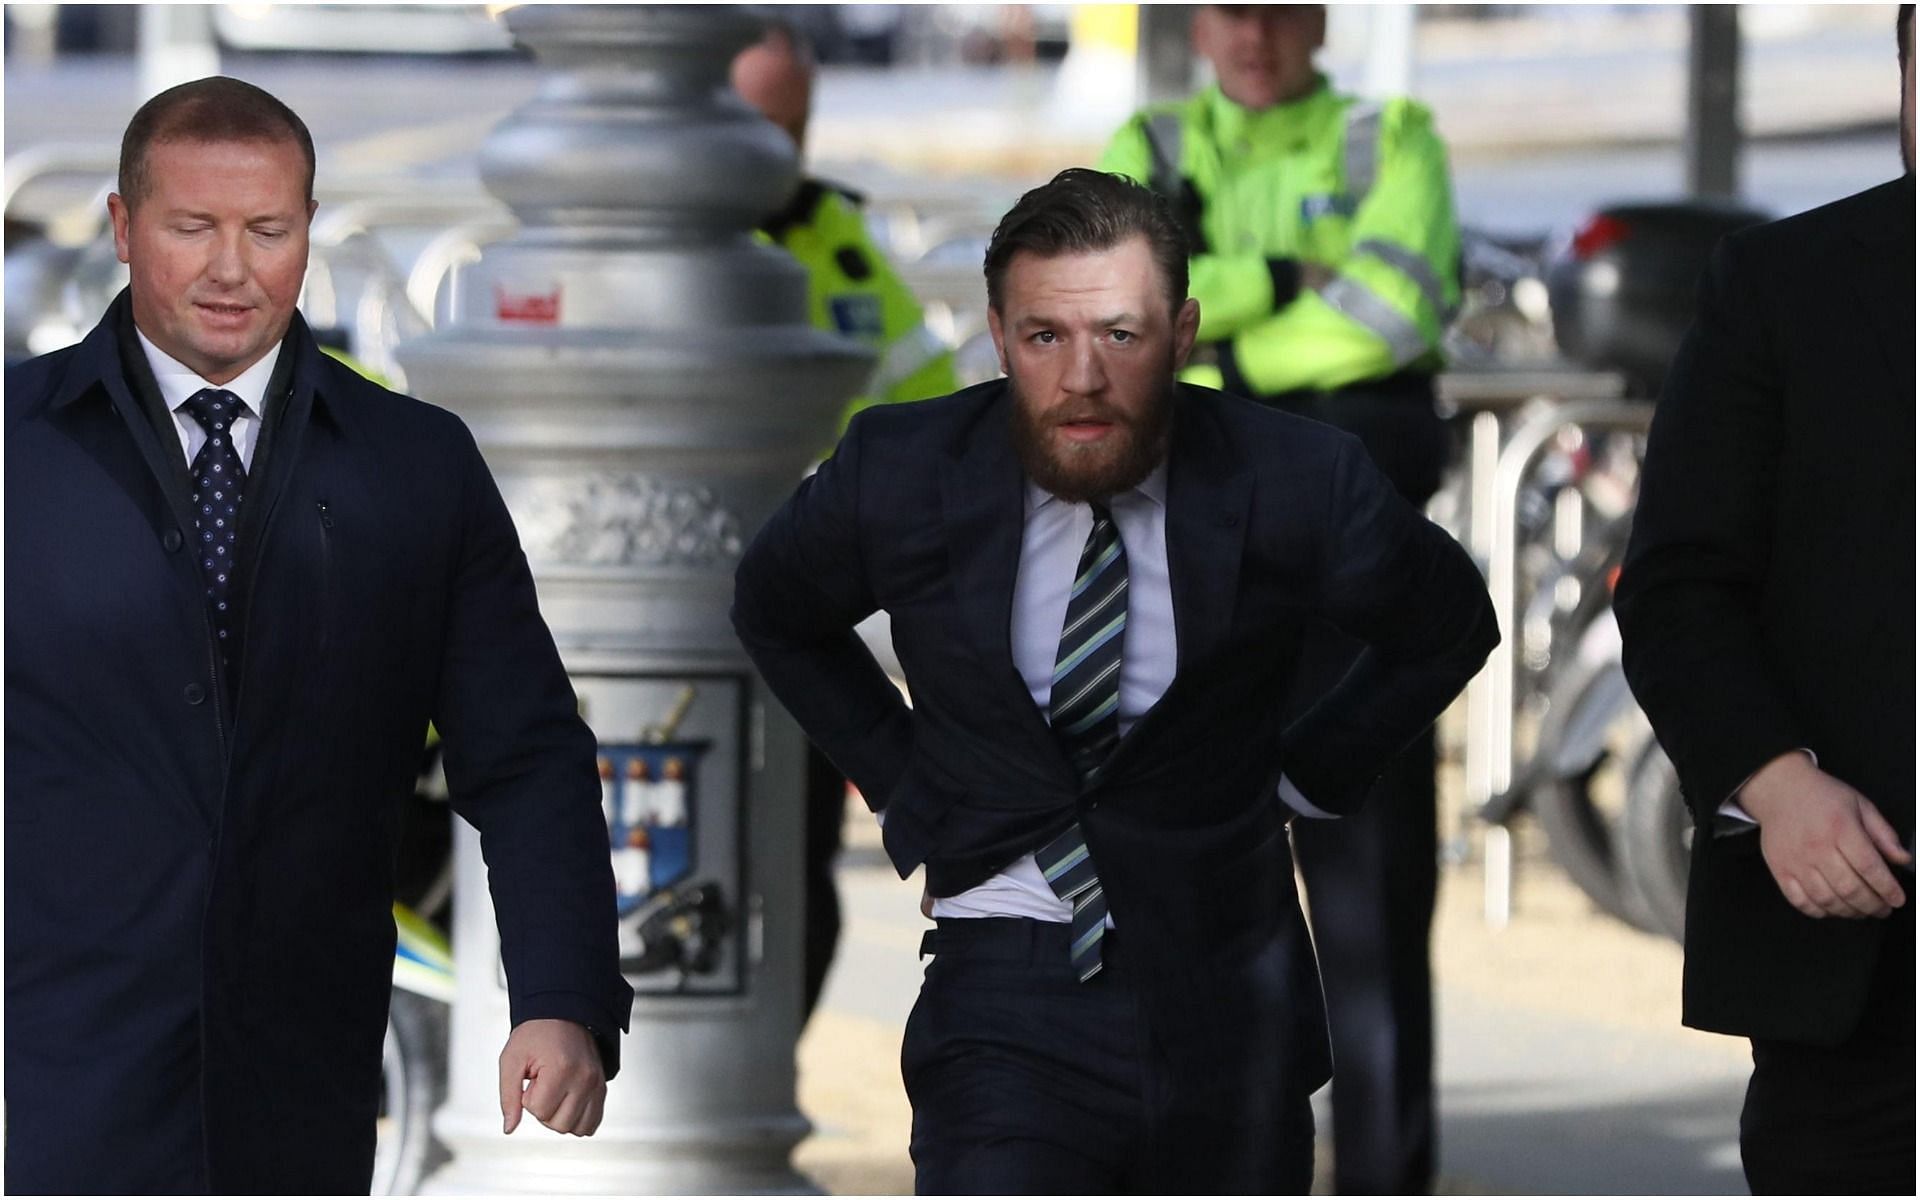 Conor McGregor facing possible charges following pub assault